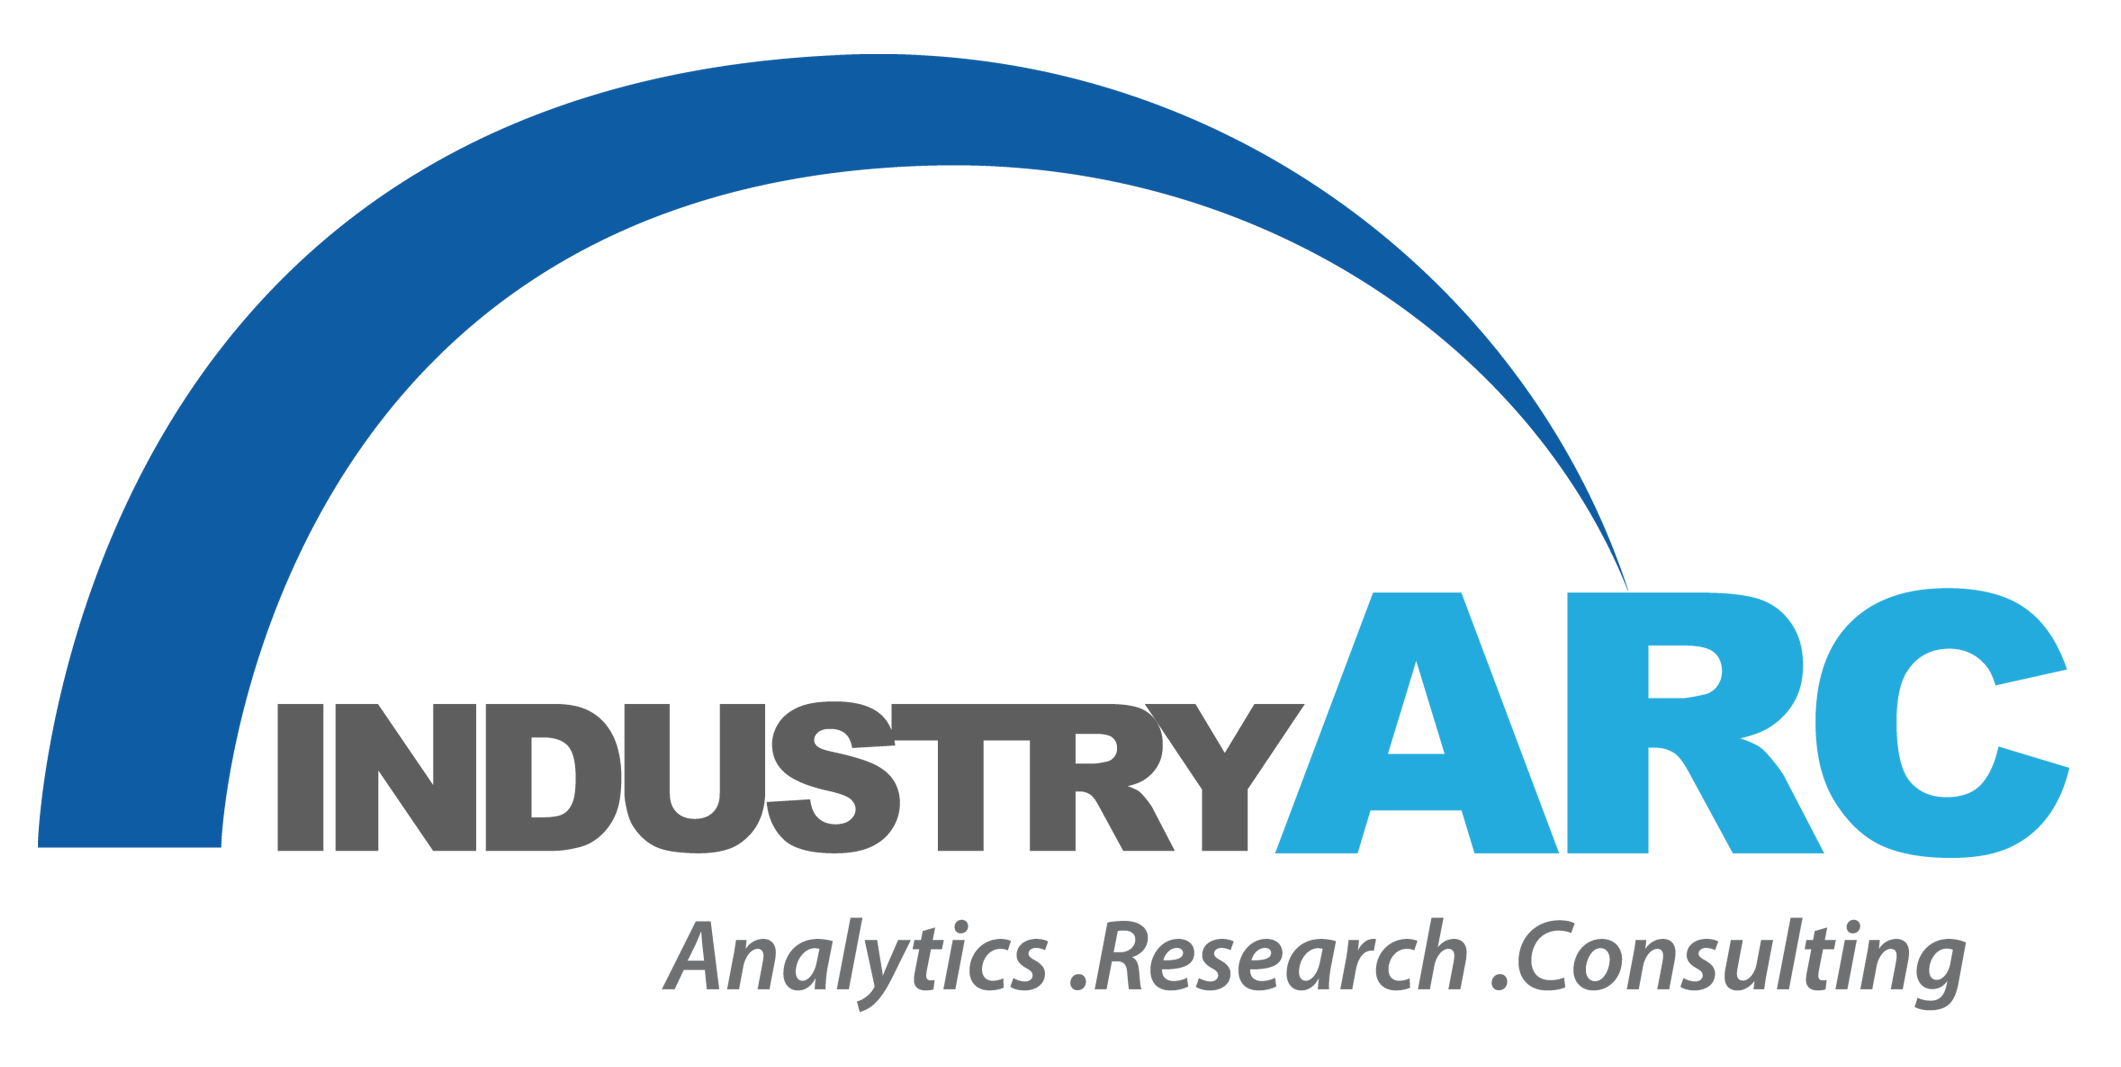 IndustryArc Market Research & Consulting